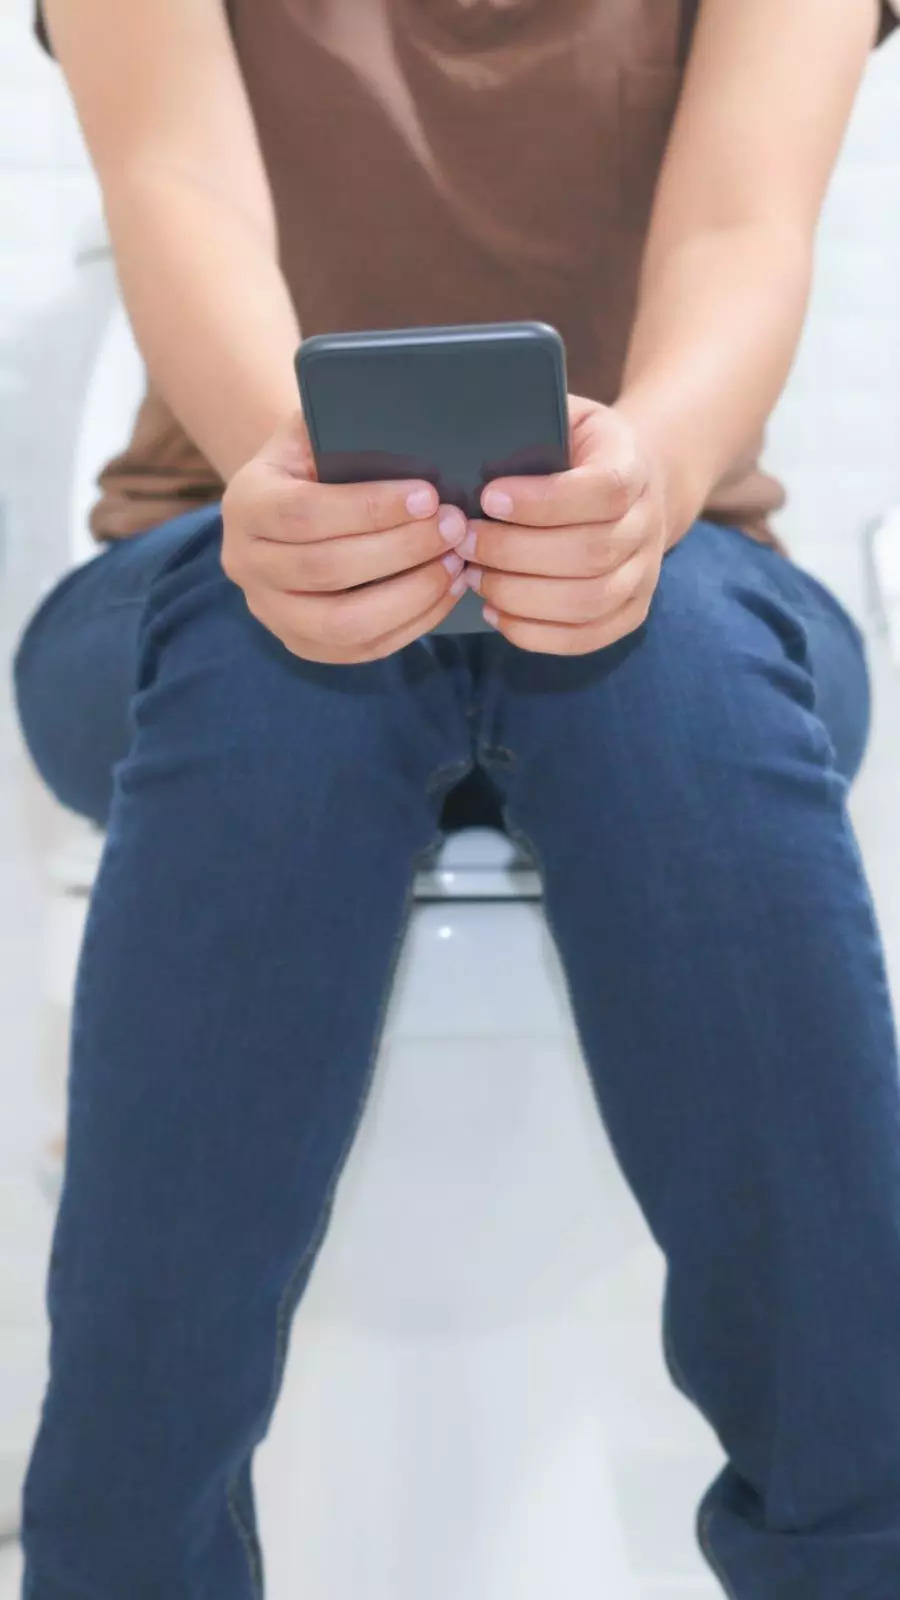 Why Sitting On The Toilet Too Long Is Worse Than You Think